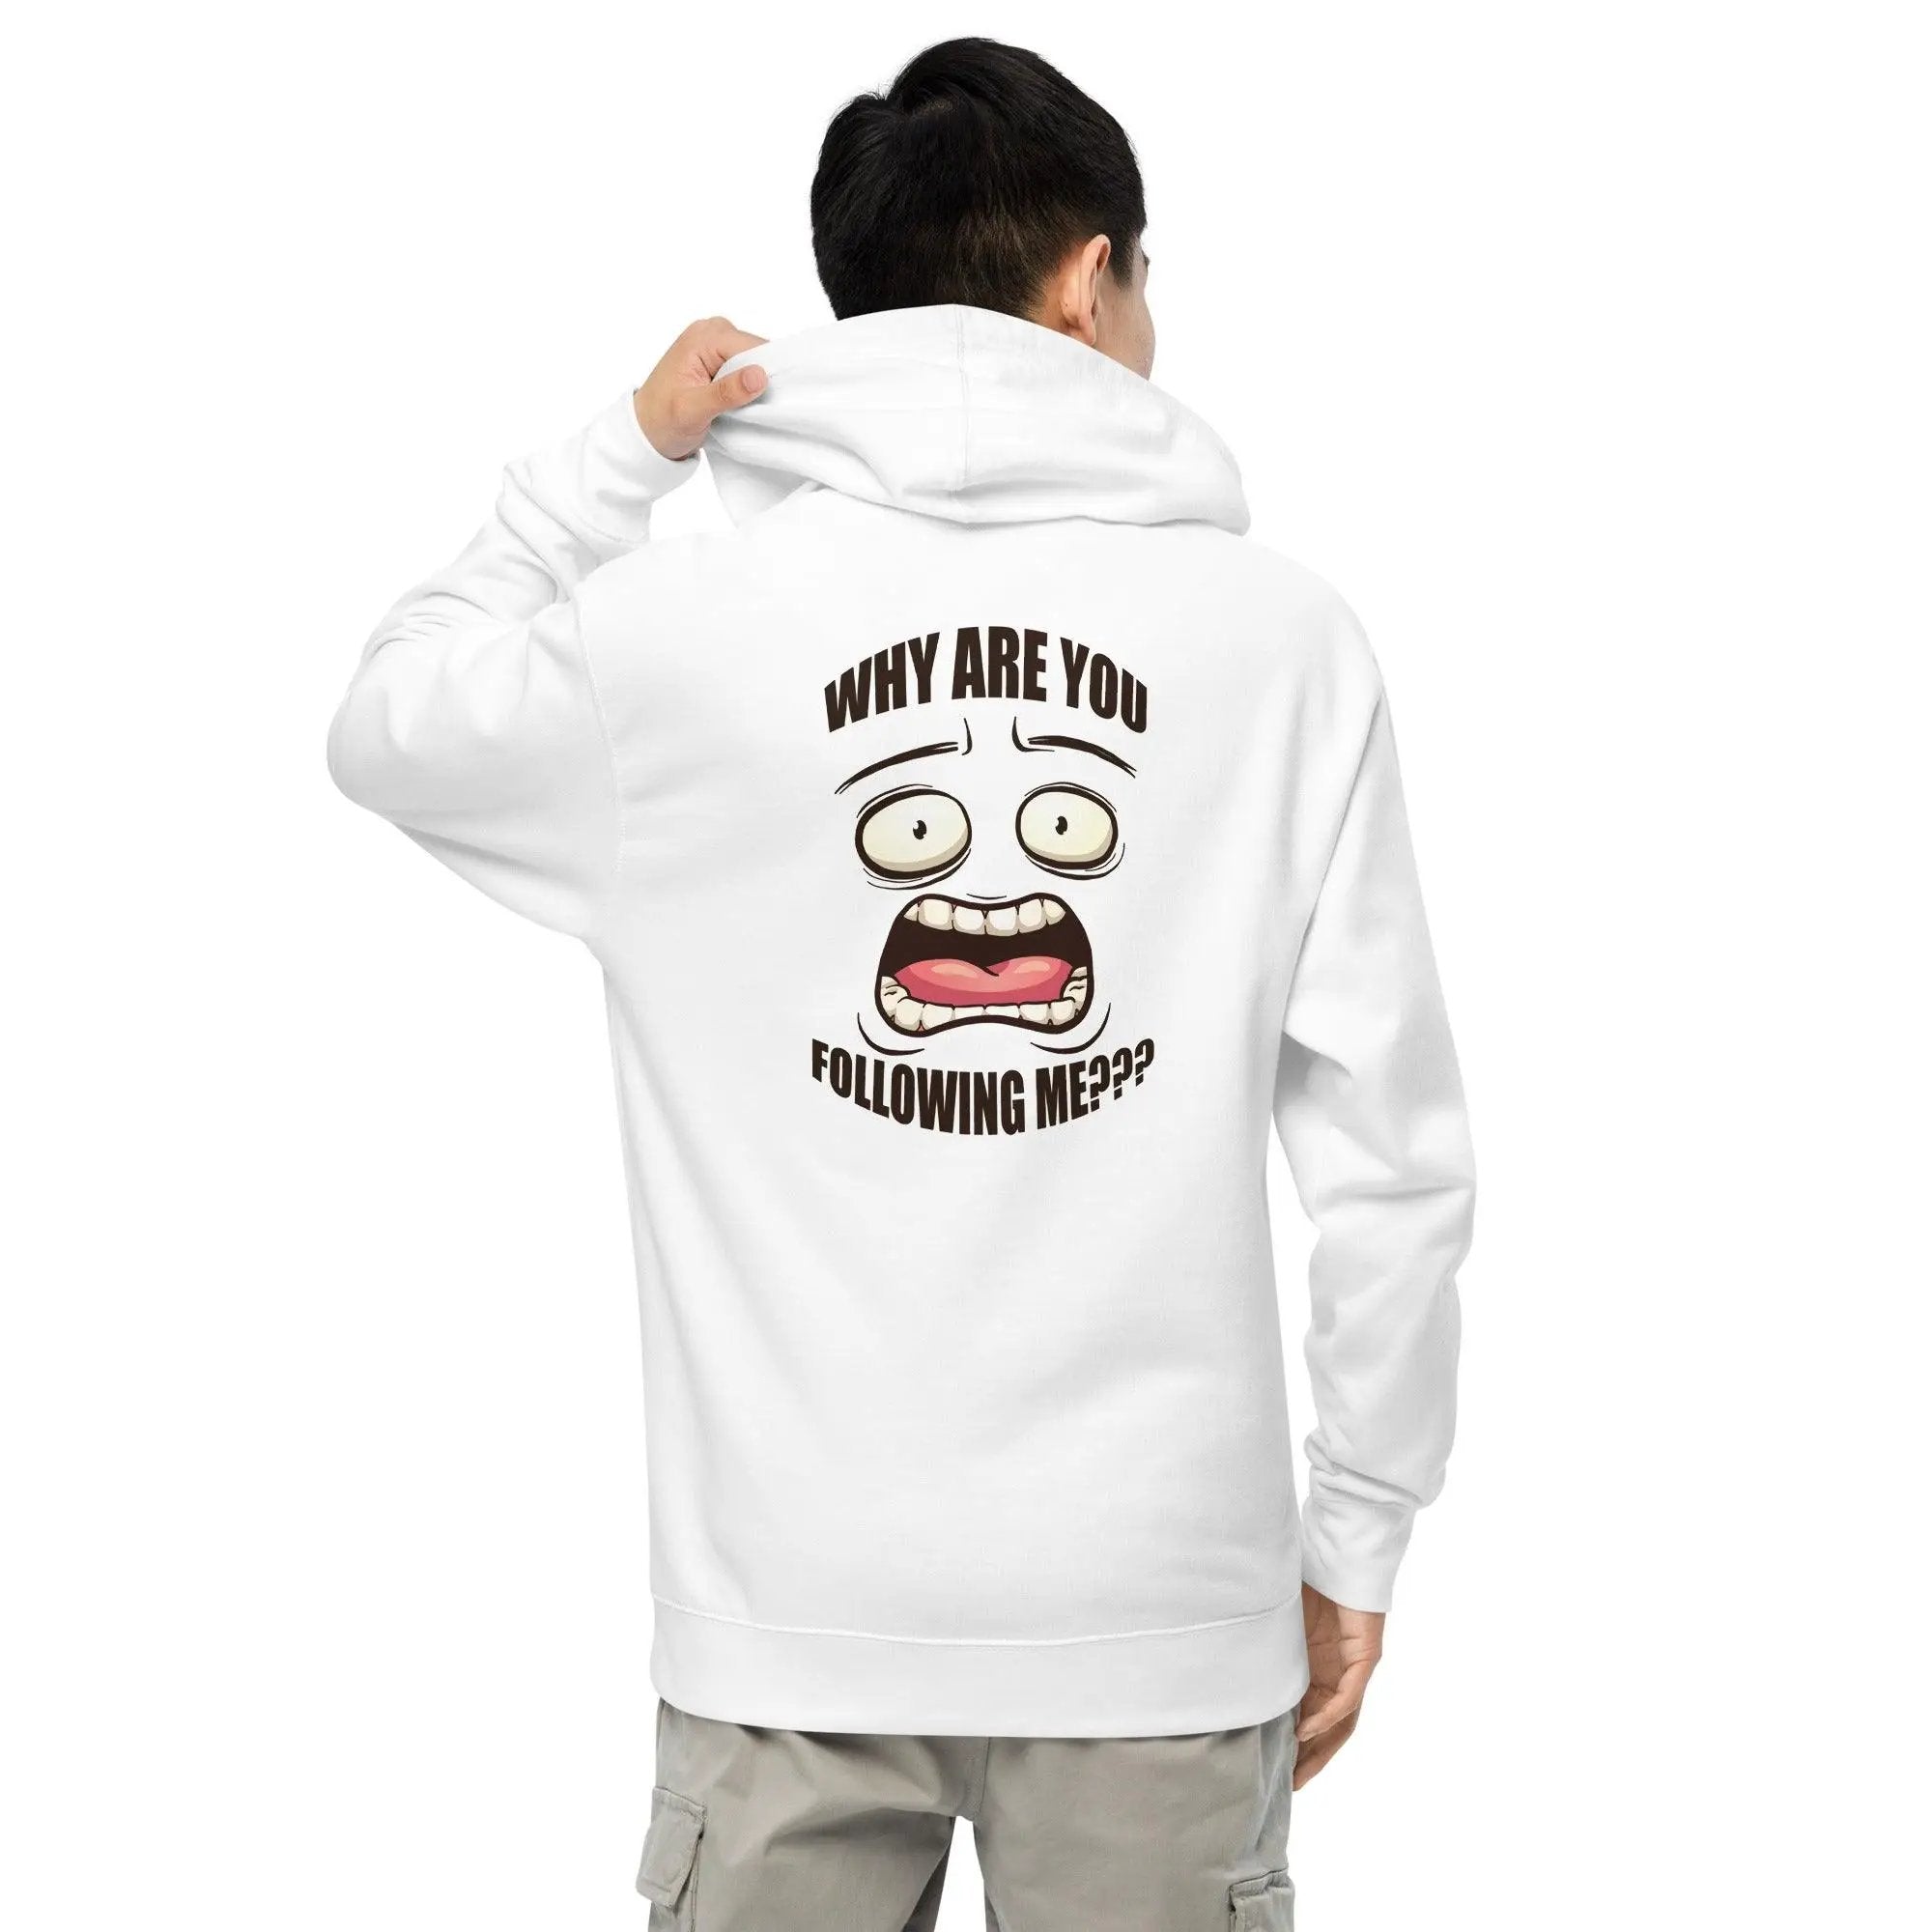 Why Are You Following Me? Unisex midweight hoodie VAWDesigns